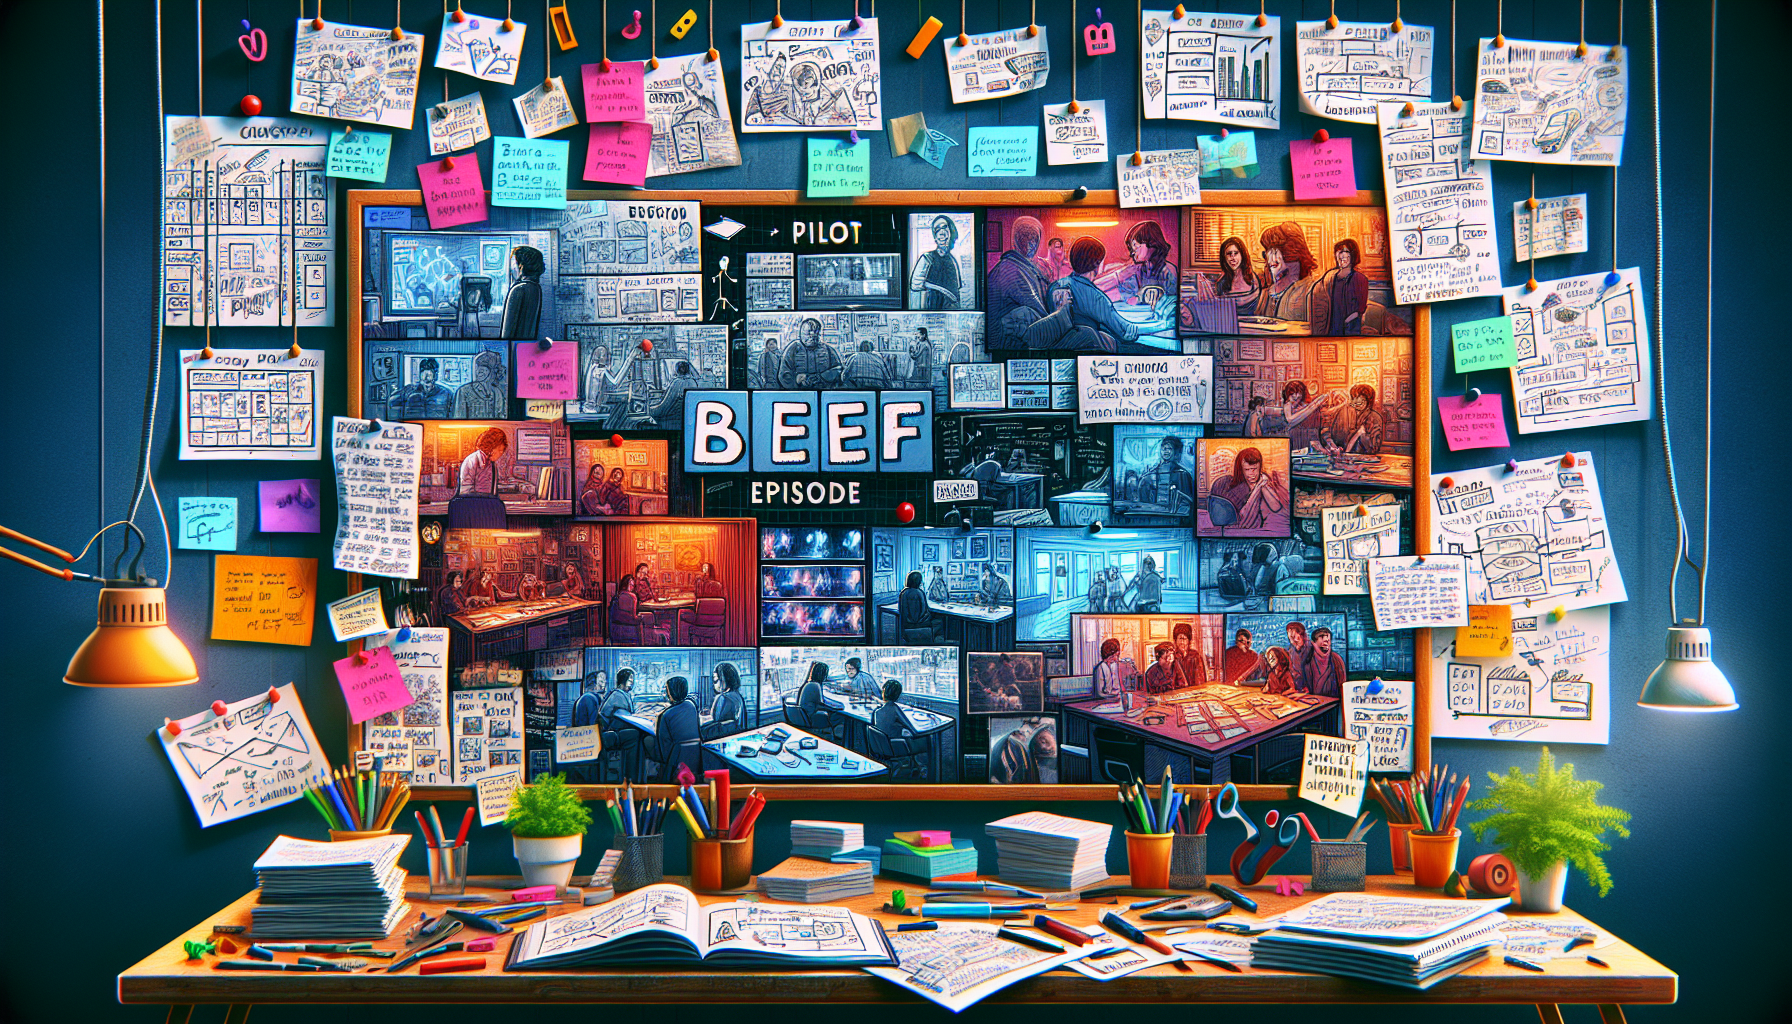 An artistic visualization of a detailed TV beat sheet for the pilot episode of a television show titled 'Beef', featuring key plot points, character arcs, and dramatic moments, all depicted within the